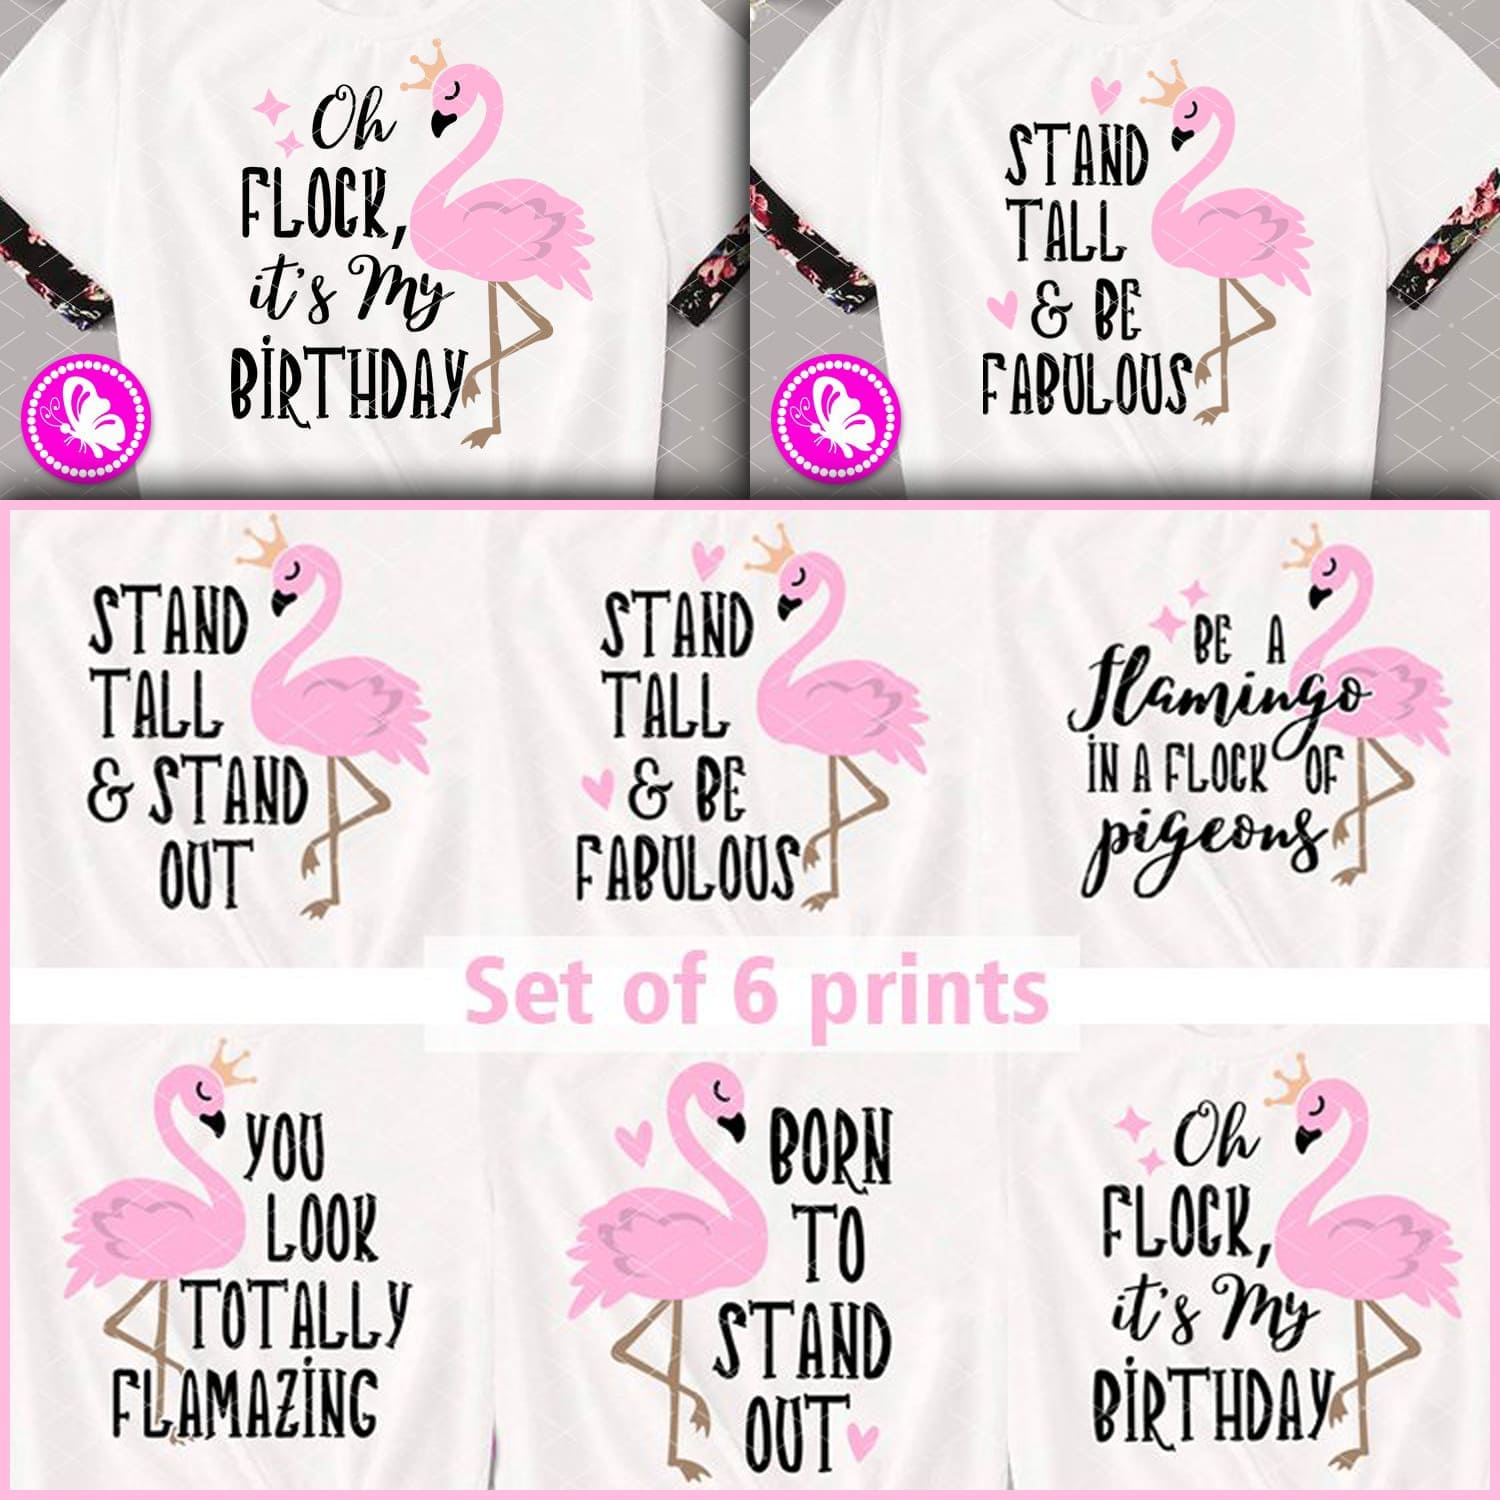 Bundle pink flamingo quotes sayings birthday t shirt, second picture 1500x1500.